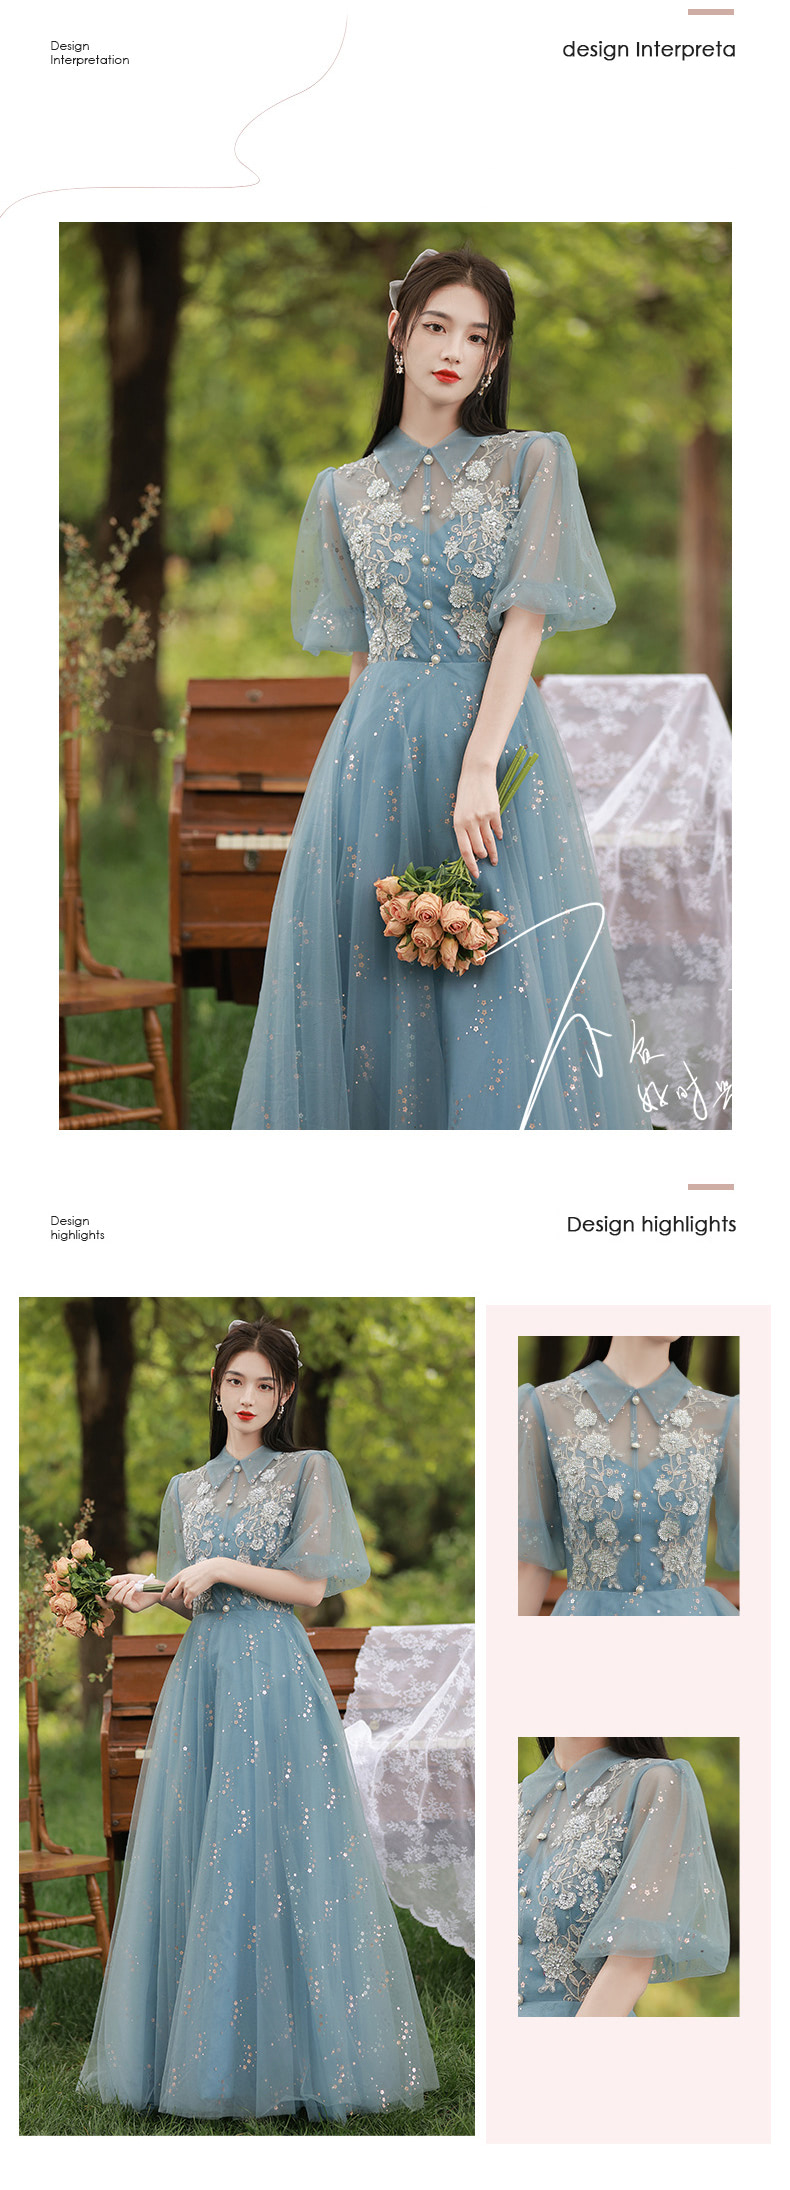 Charming Sweet Square Collar Blue Floral Embroidered Evening Party Dress08